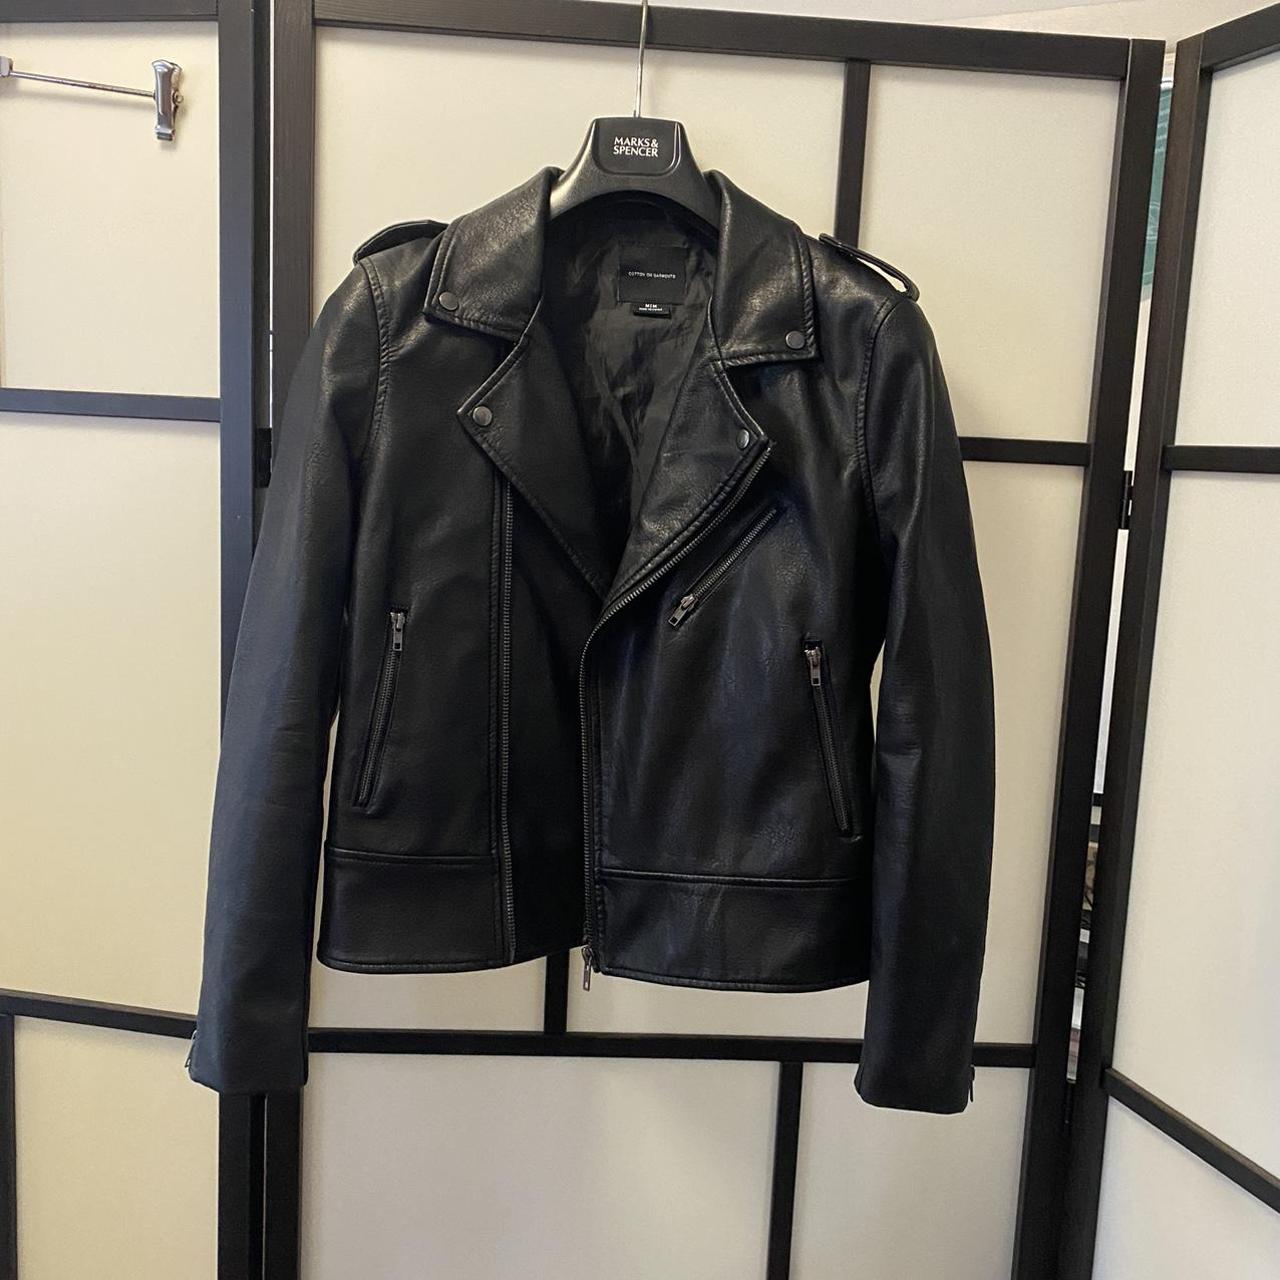 Vegan Leather jacket ~Feel free to ask questions,... - Depop